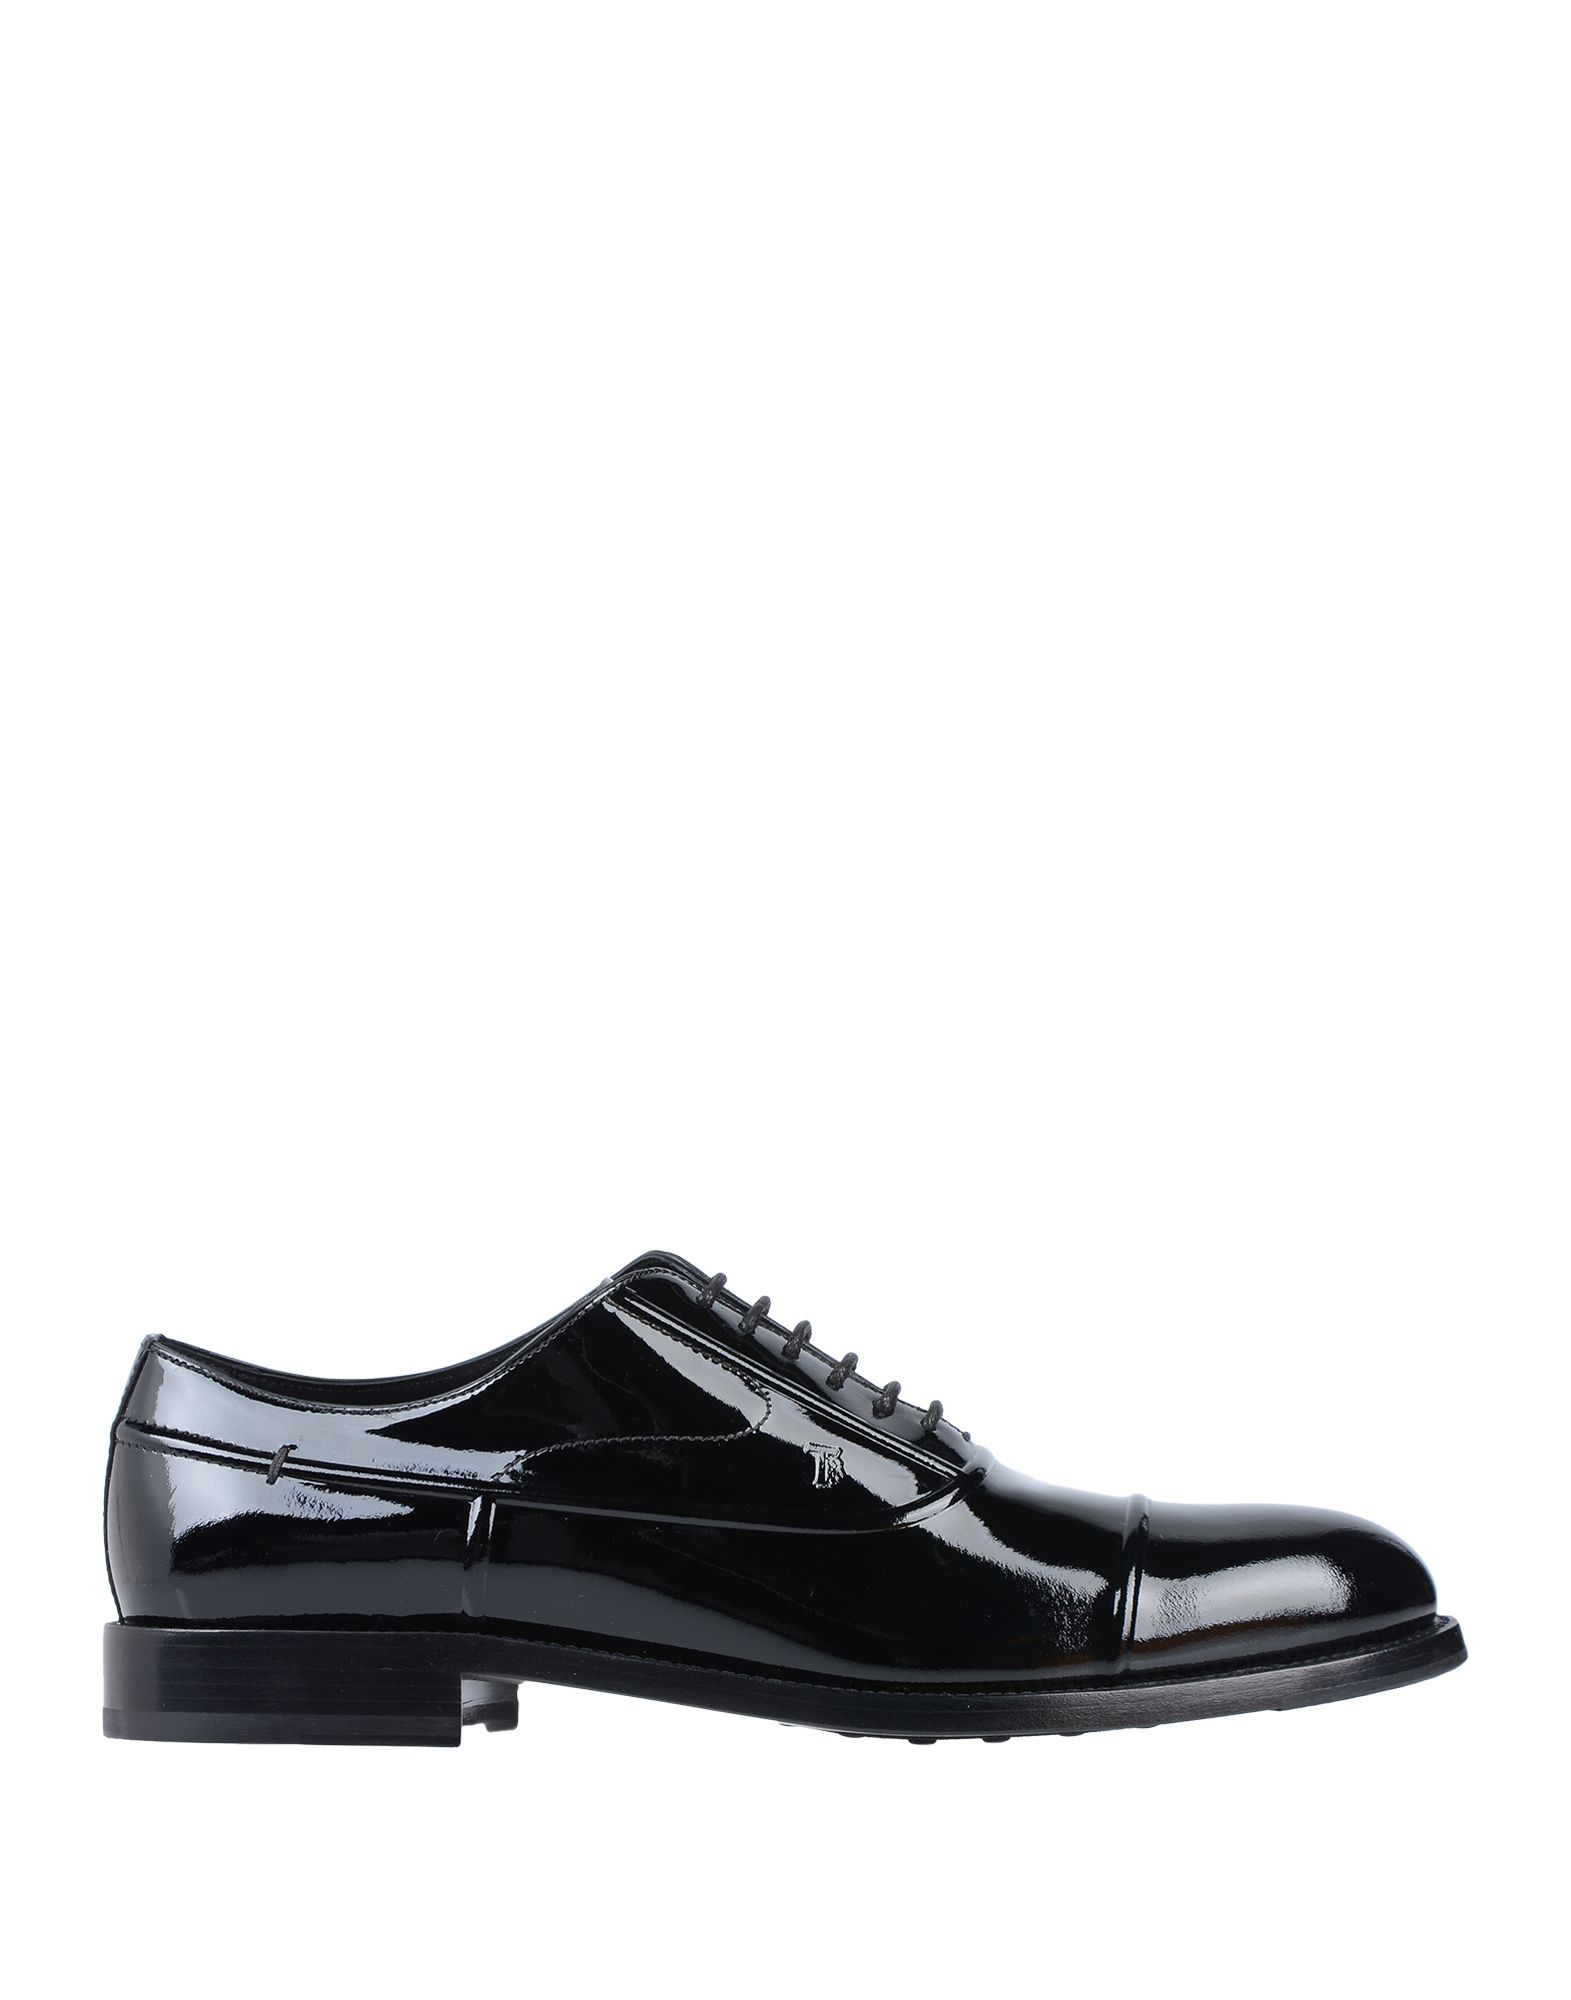 tods shoes black friday